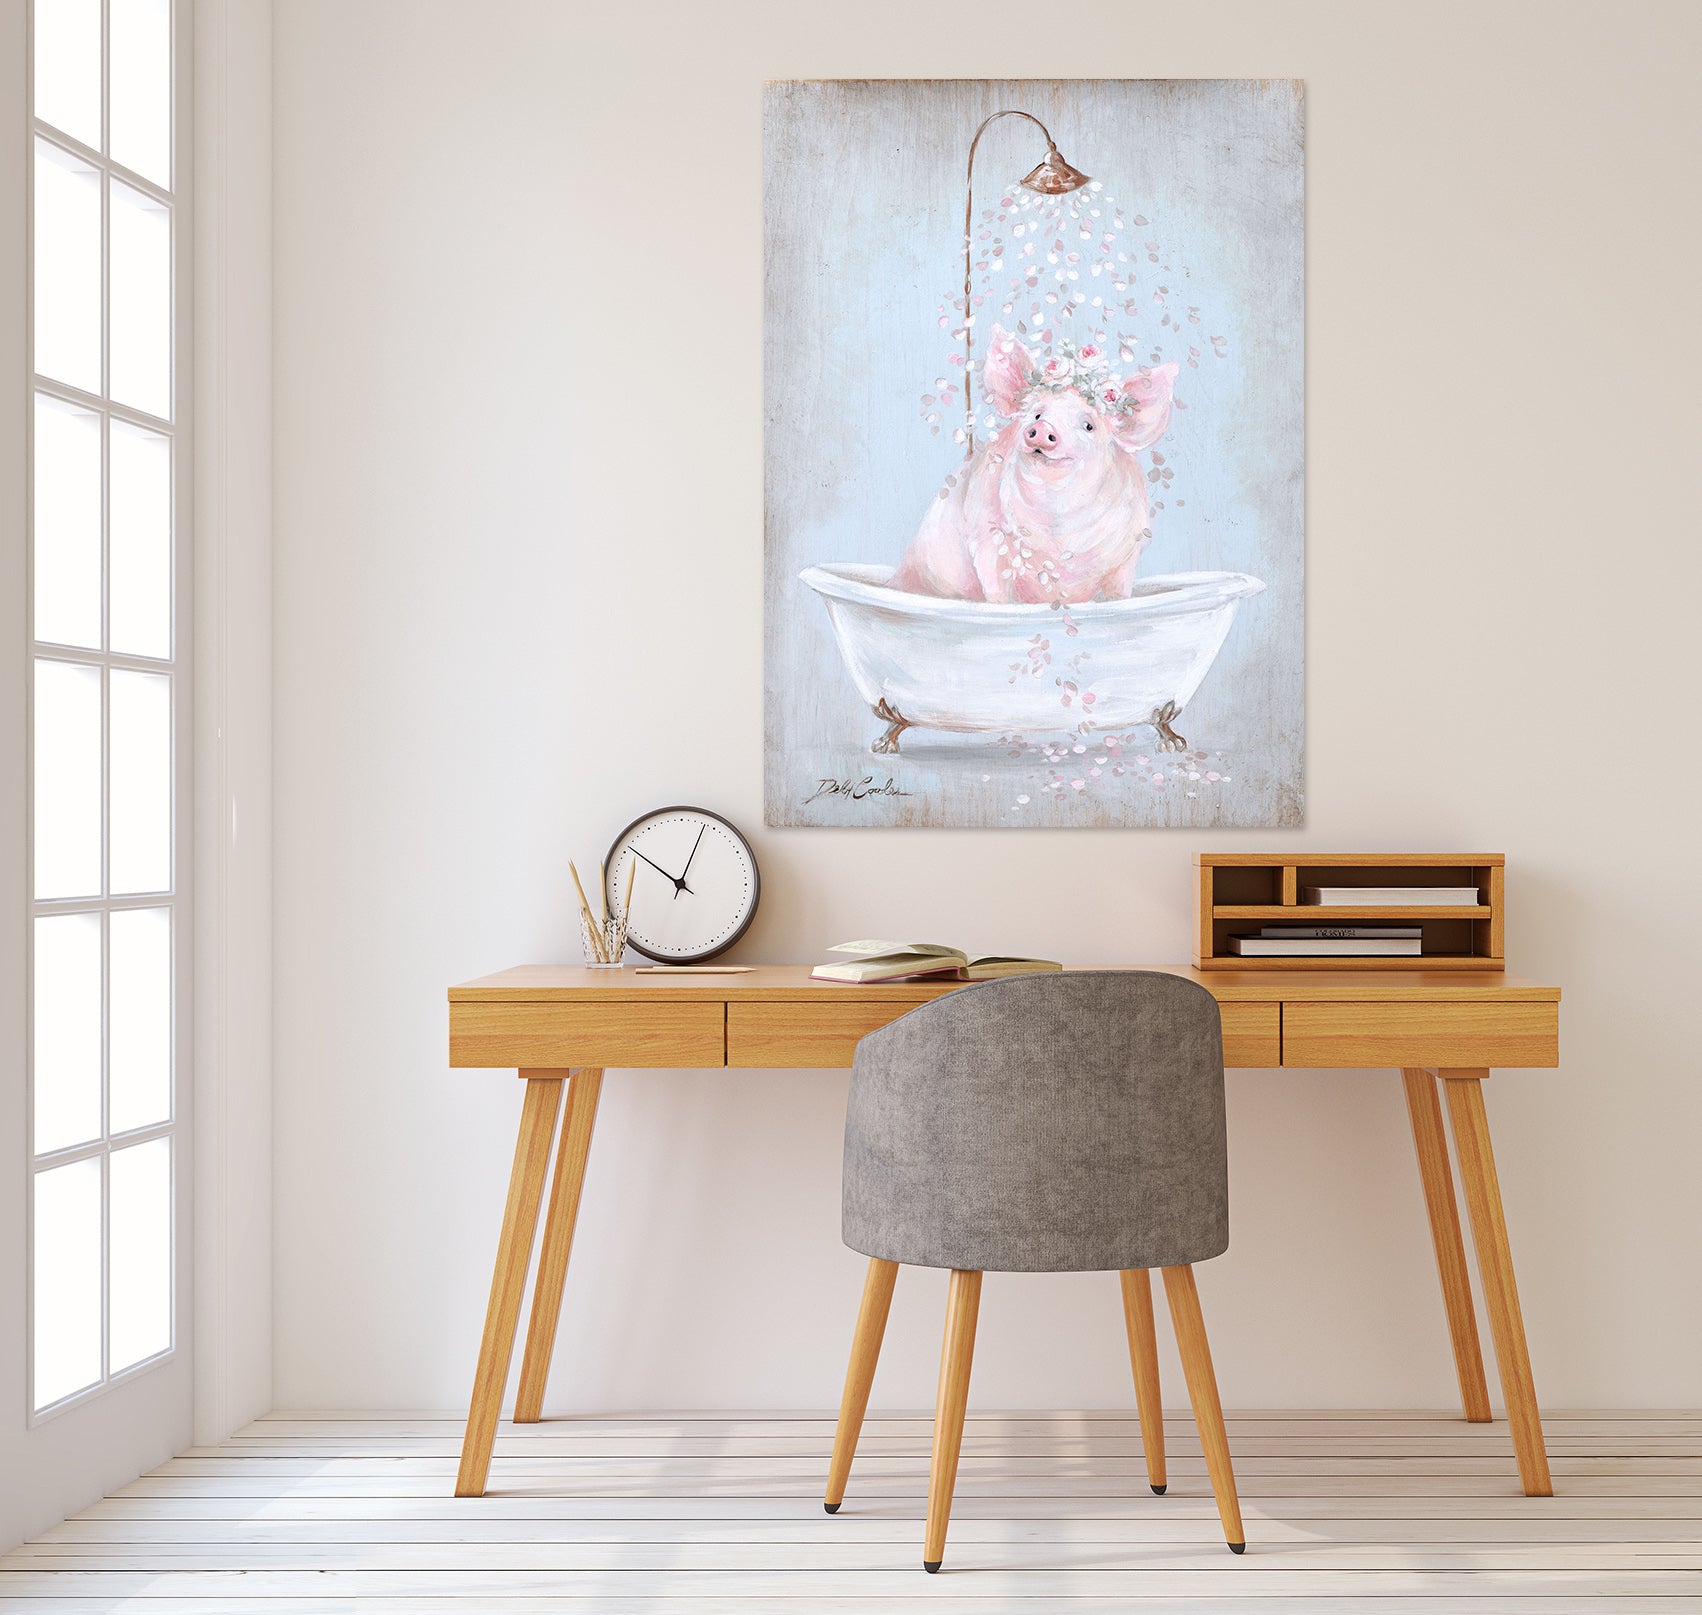 3D Pig Take Shower 039 Debi Coules Wall Sticker